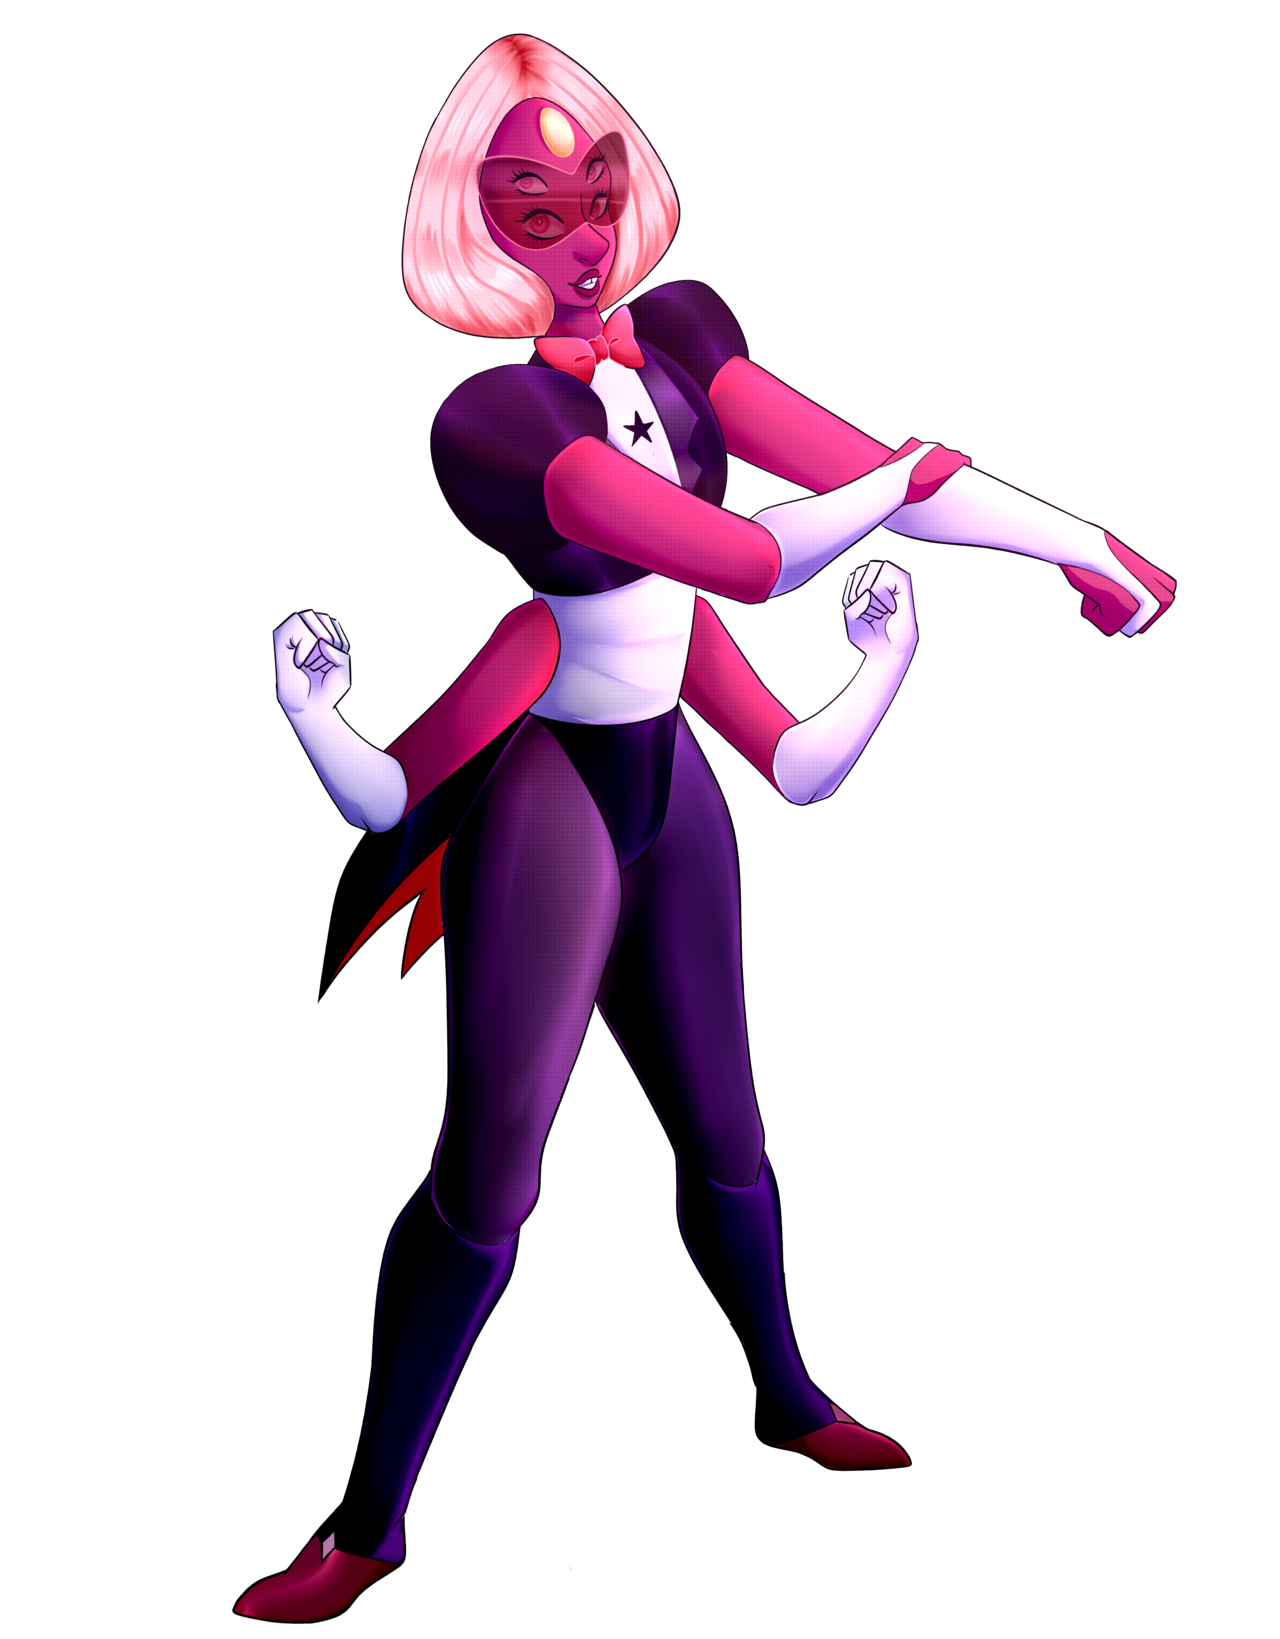 I drew Sardonyx from Steven Universe and I’m really happy how it came out :).